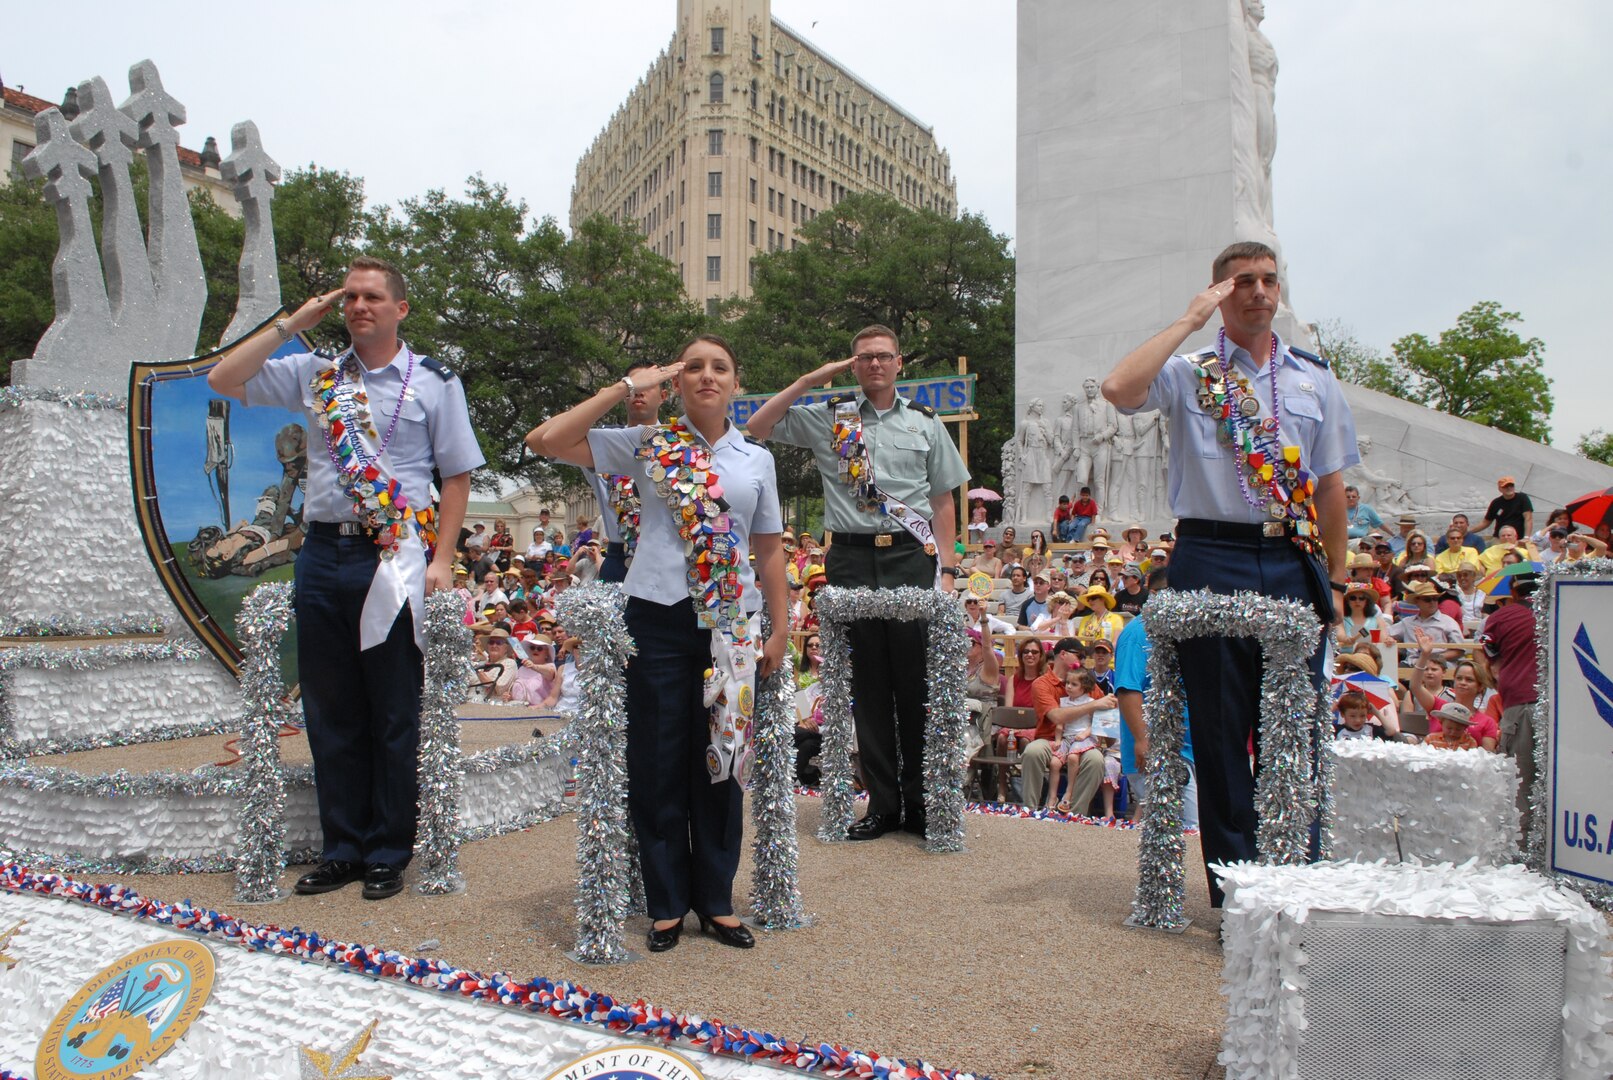 First Lt. Jennifer Ferrer (left center) joins other military ambassadors in saluting the official party from a float at the 2007 Fiesta celebration in downtown San Antonio. (U.S. Air Force photo by Rich McFadden)